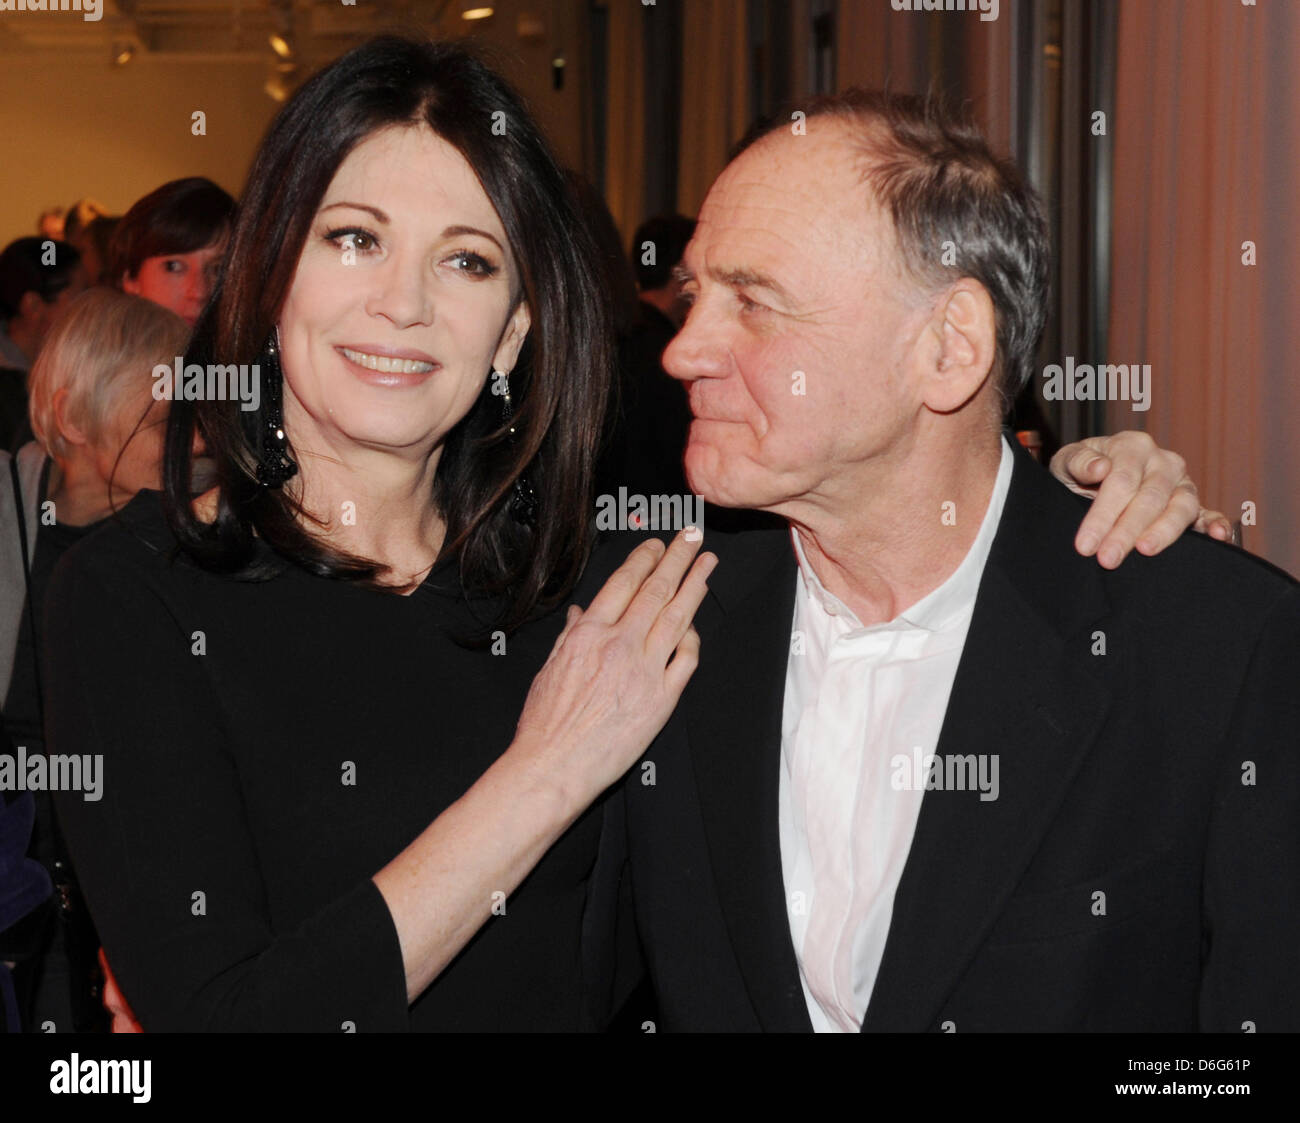 German actresss Iris Berben and Swiss actor Bruno Ganz attend the reception for the new section German Cinema 'LOLA@berlinale' during the 62nd Berlin International Film Festival, in Berlin, Germany, 10 February 2012. The 62nd Berlinale takes place from 09 to 19 February. Photo: Jens Kalaene dpa  +++(c) dpa - Bildfunk+++ Stock Photo